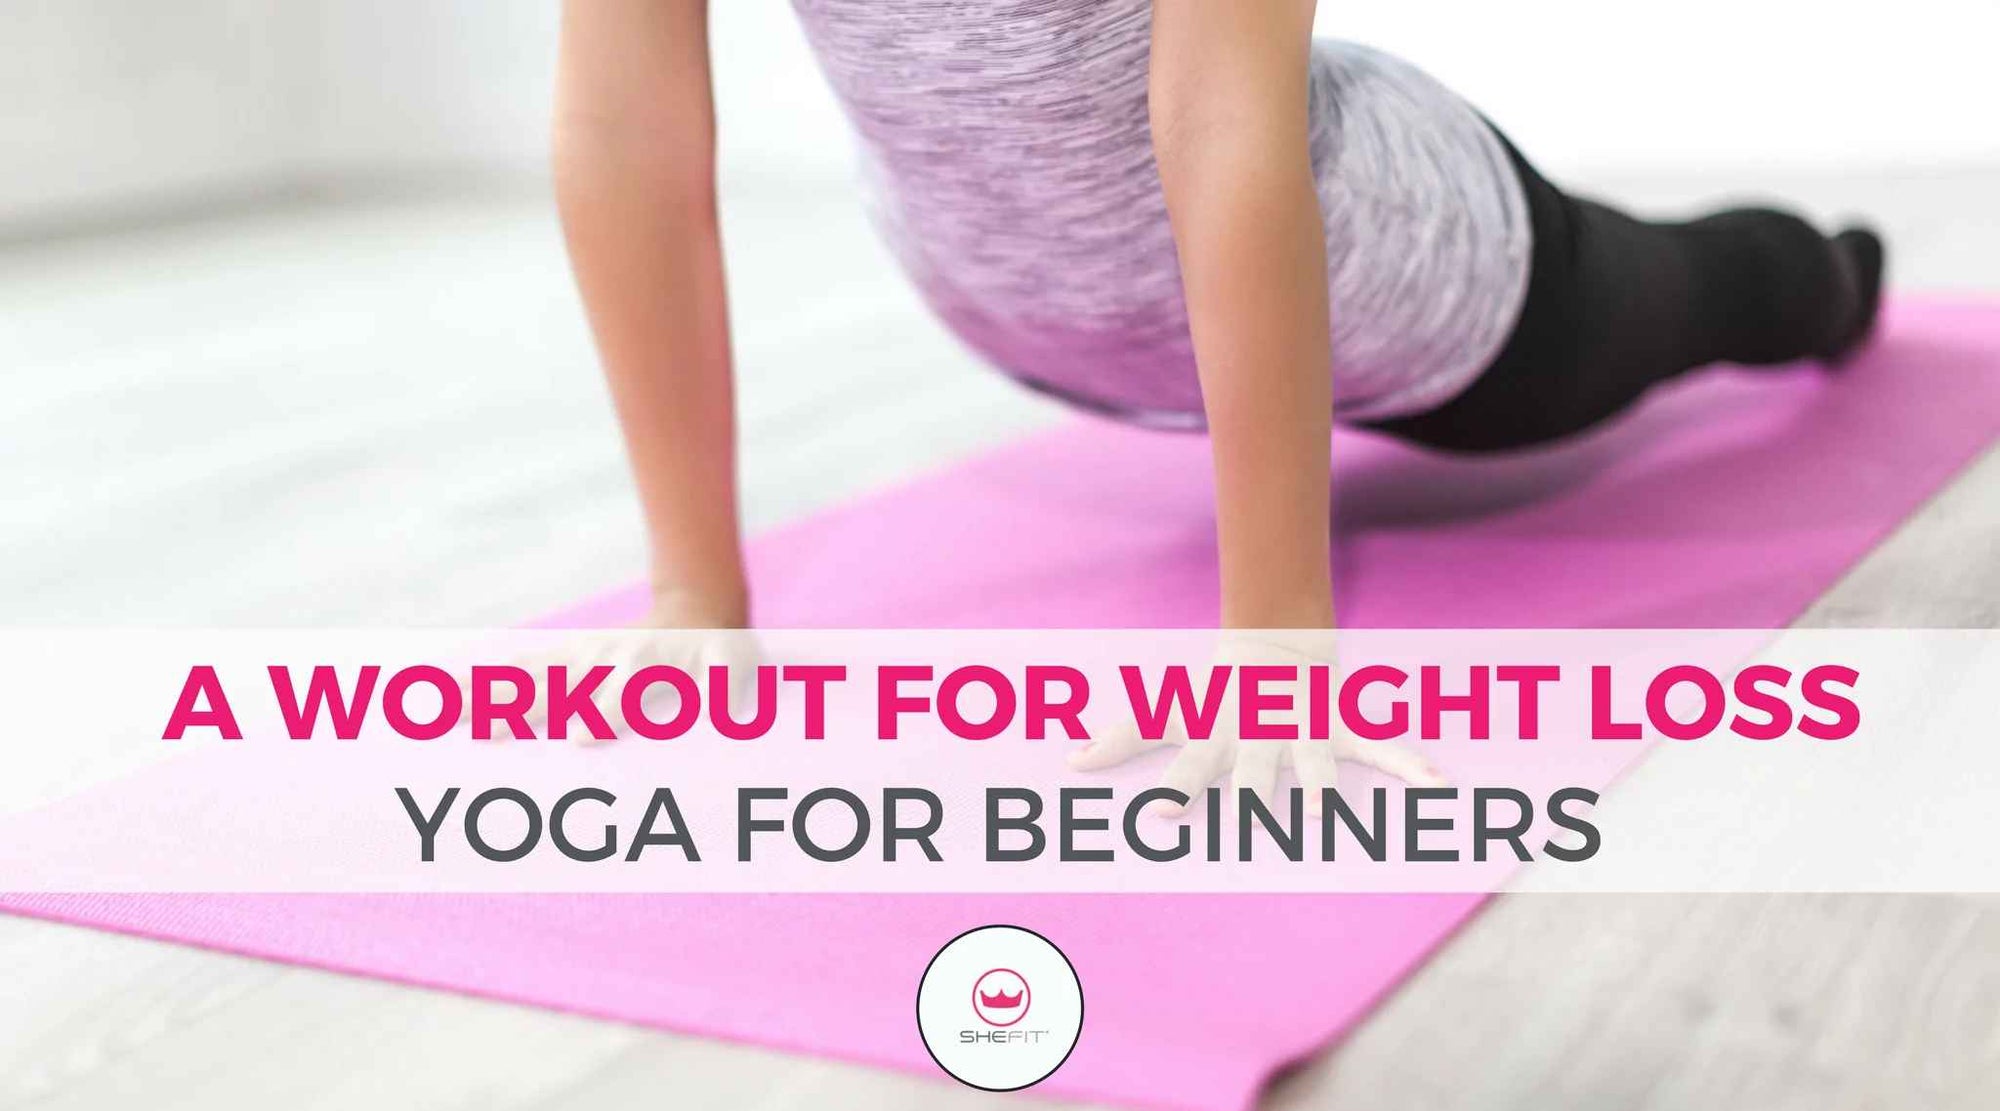 A Workout for Weigh Loss: Yoga for Beginners | Yoga can be a great workout as long as you practice regularly & remember to eat right. Yoga is great not only for flexibility & weight loss but for the mind as well. 